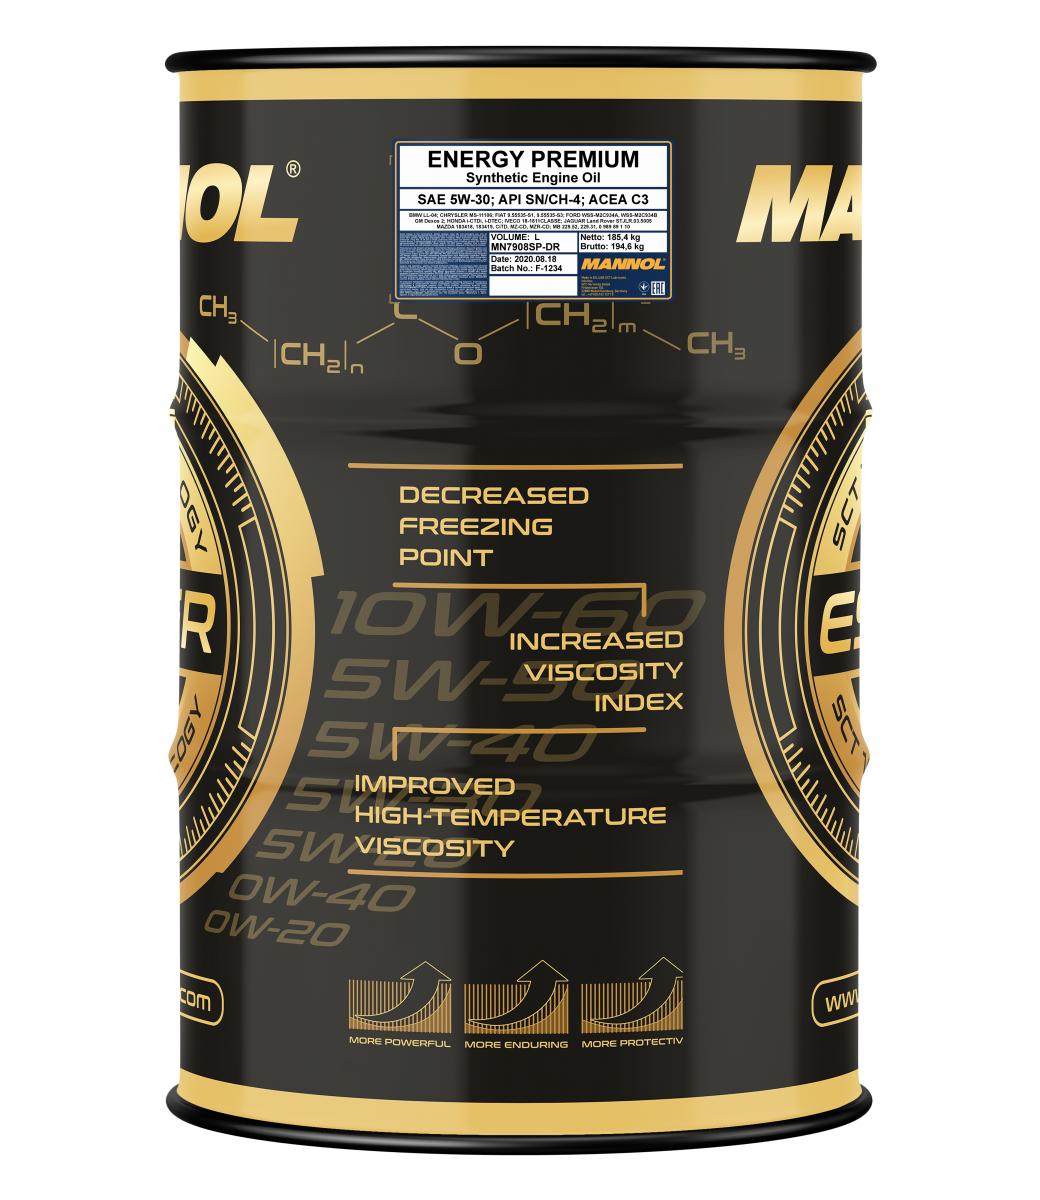 MANNOL ENERGY SAE 5W-30 FULLY SYNTHETIC ENGINE OIL (4L) 